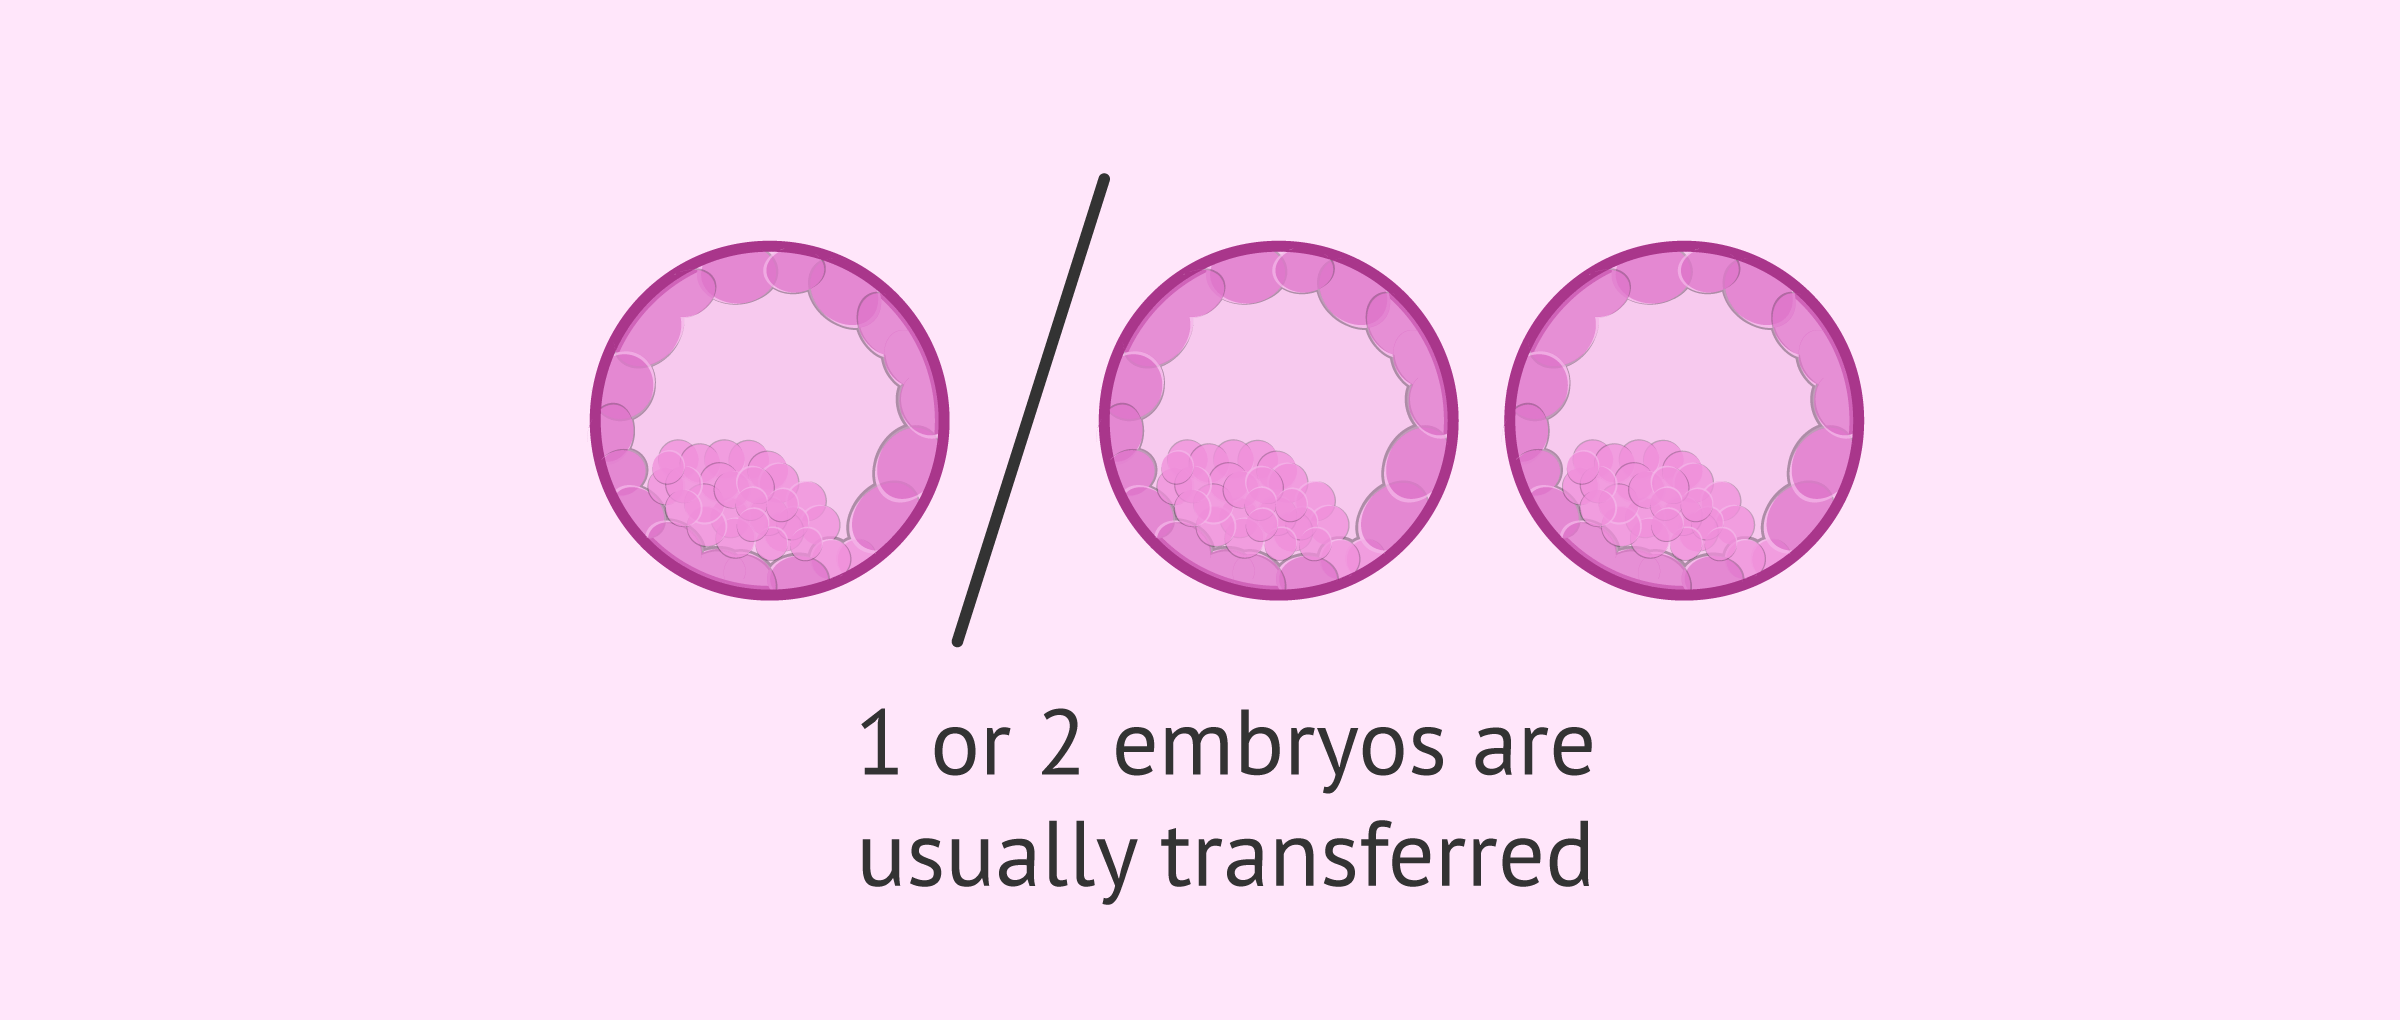 Transfer of 1 or 2 embryos